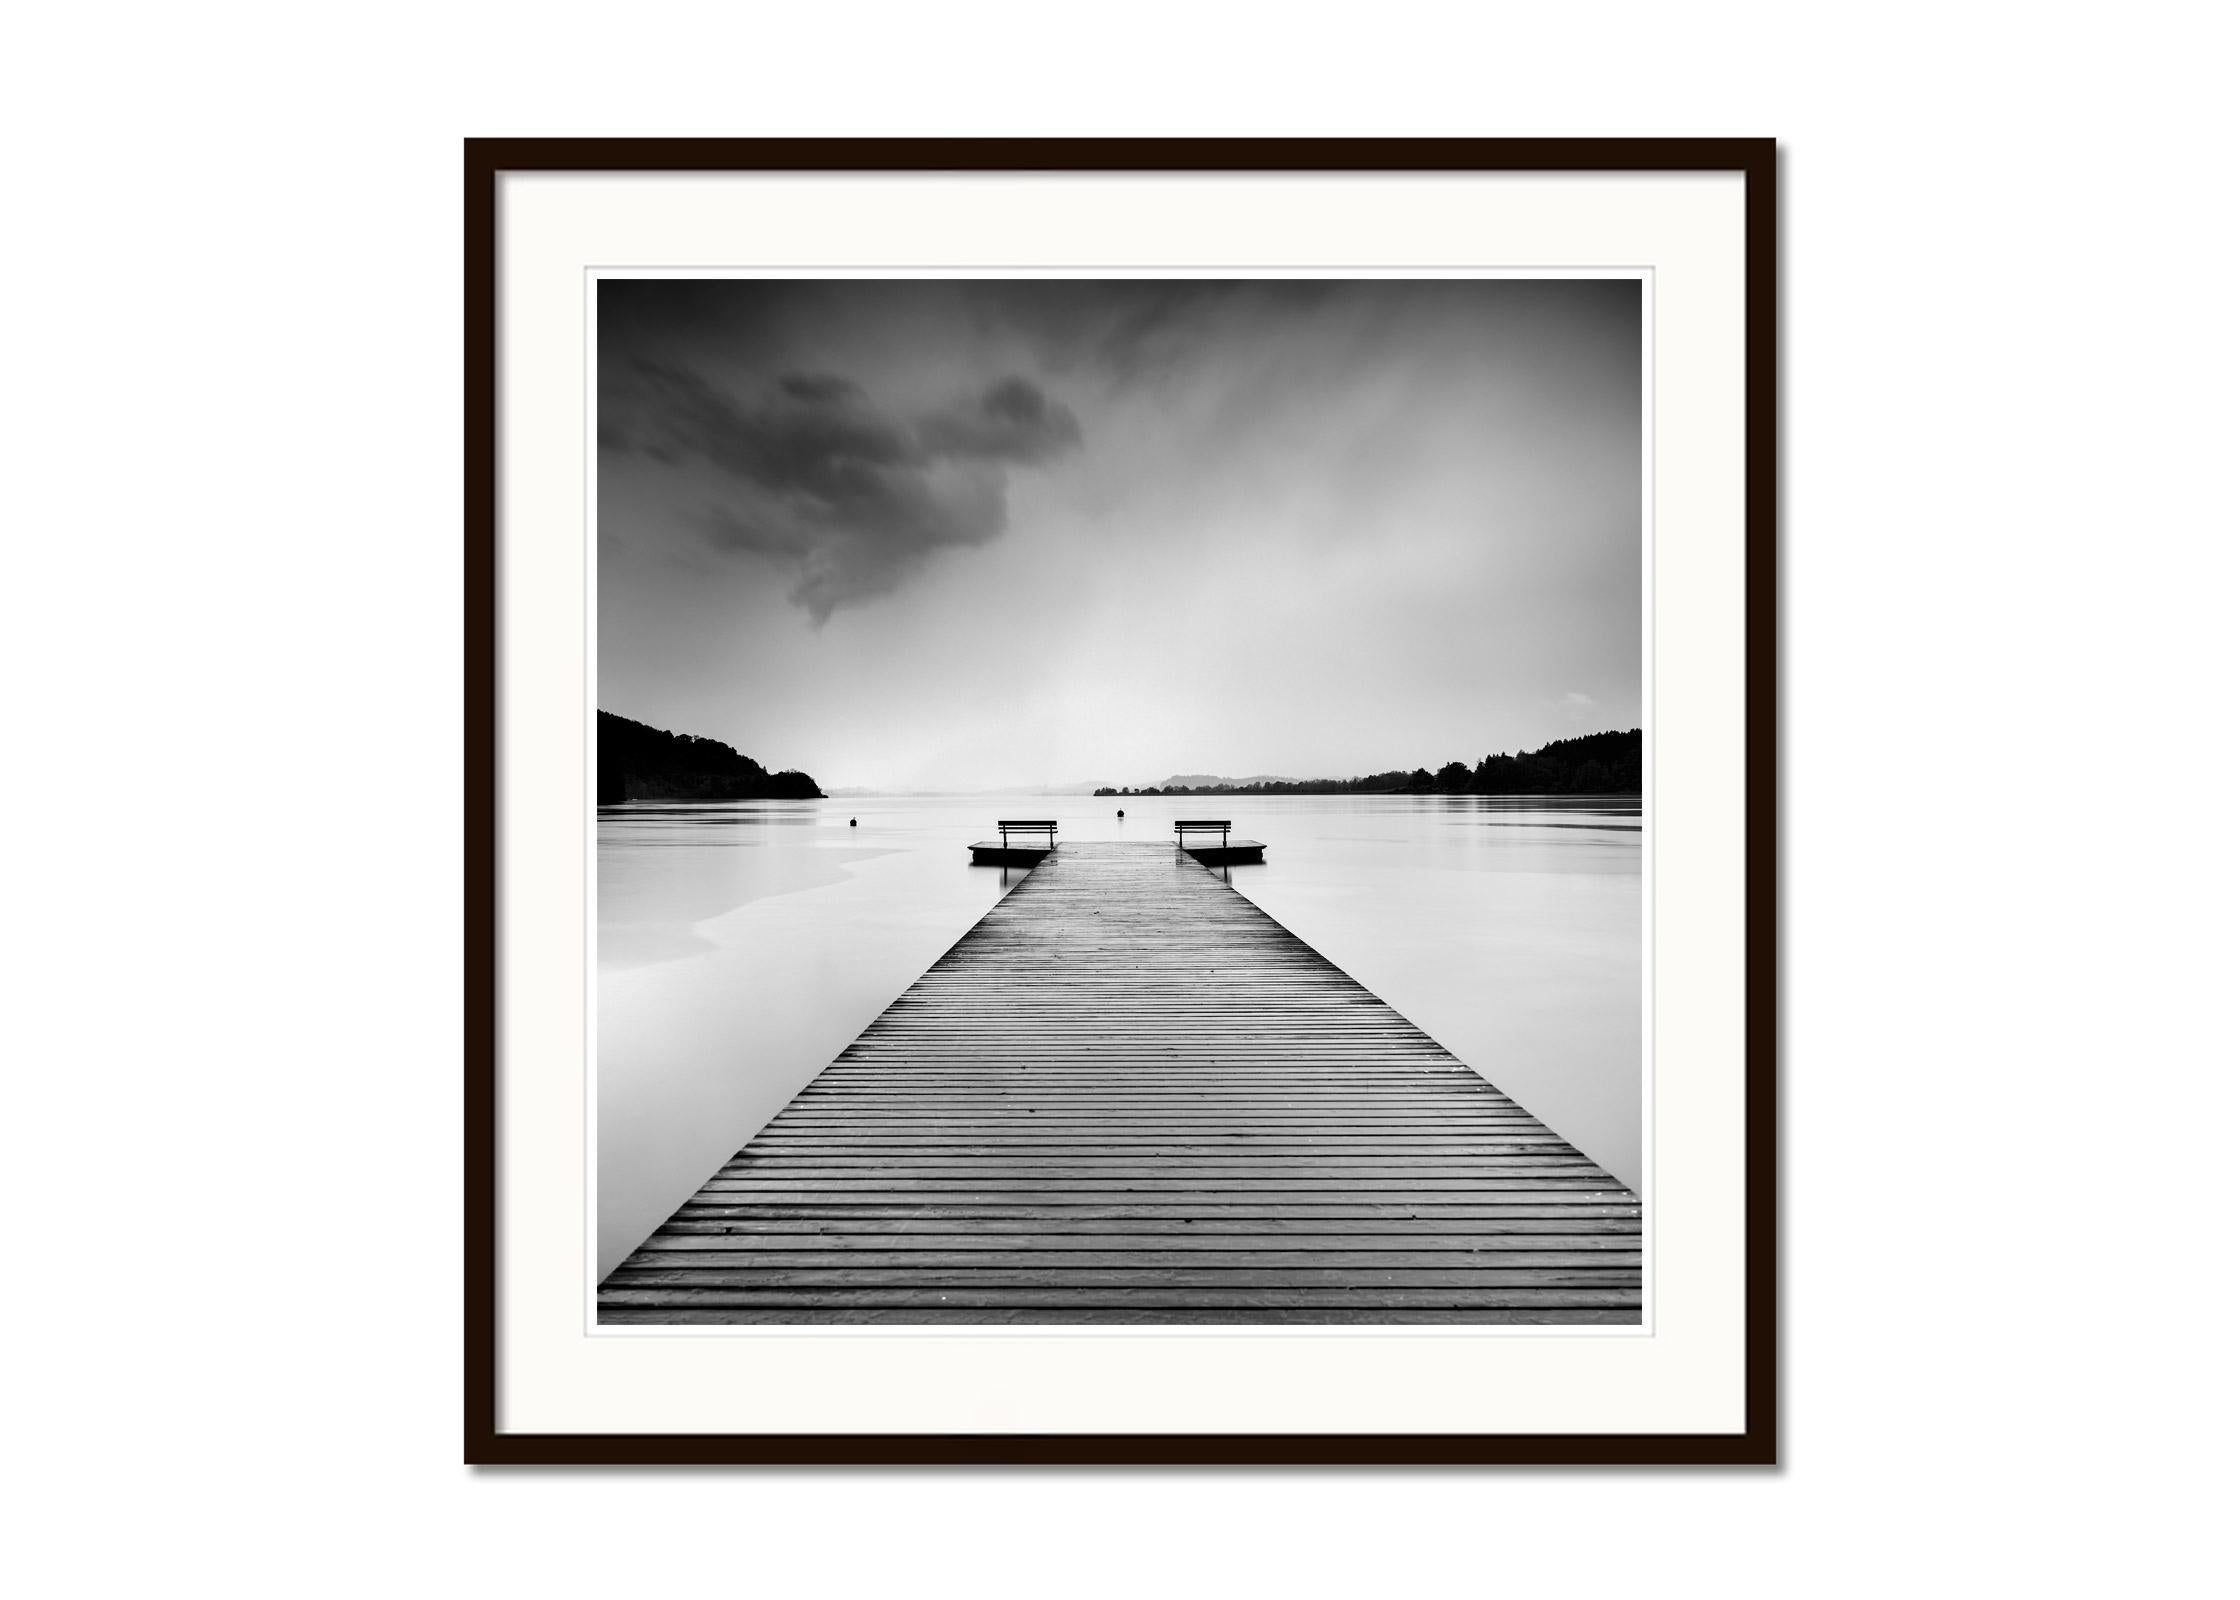 Black and white fine art landscape photography. Jetty with benches on a rainy day at the beautiful Wallersee in Salzburg, Austria. Archival pigment ink print, edition of 7. Signed, titled, dated and numbered by artist. Certificate of authenticity